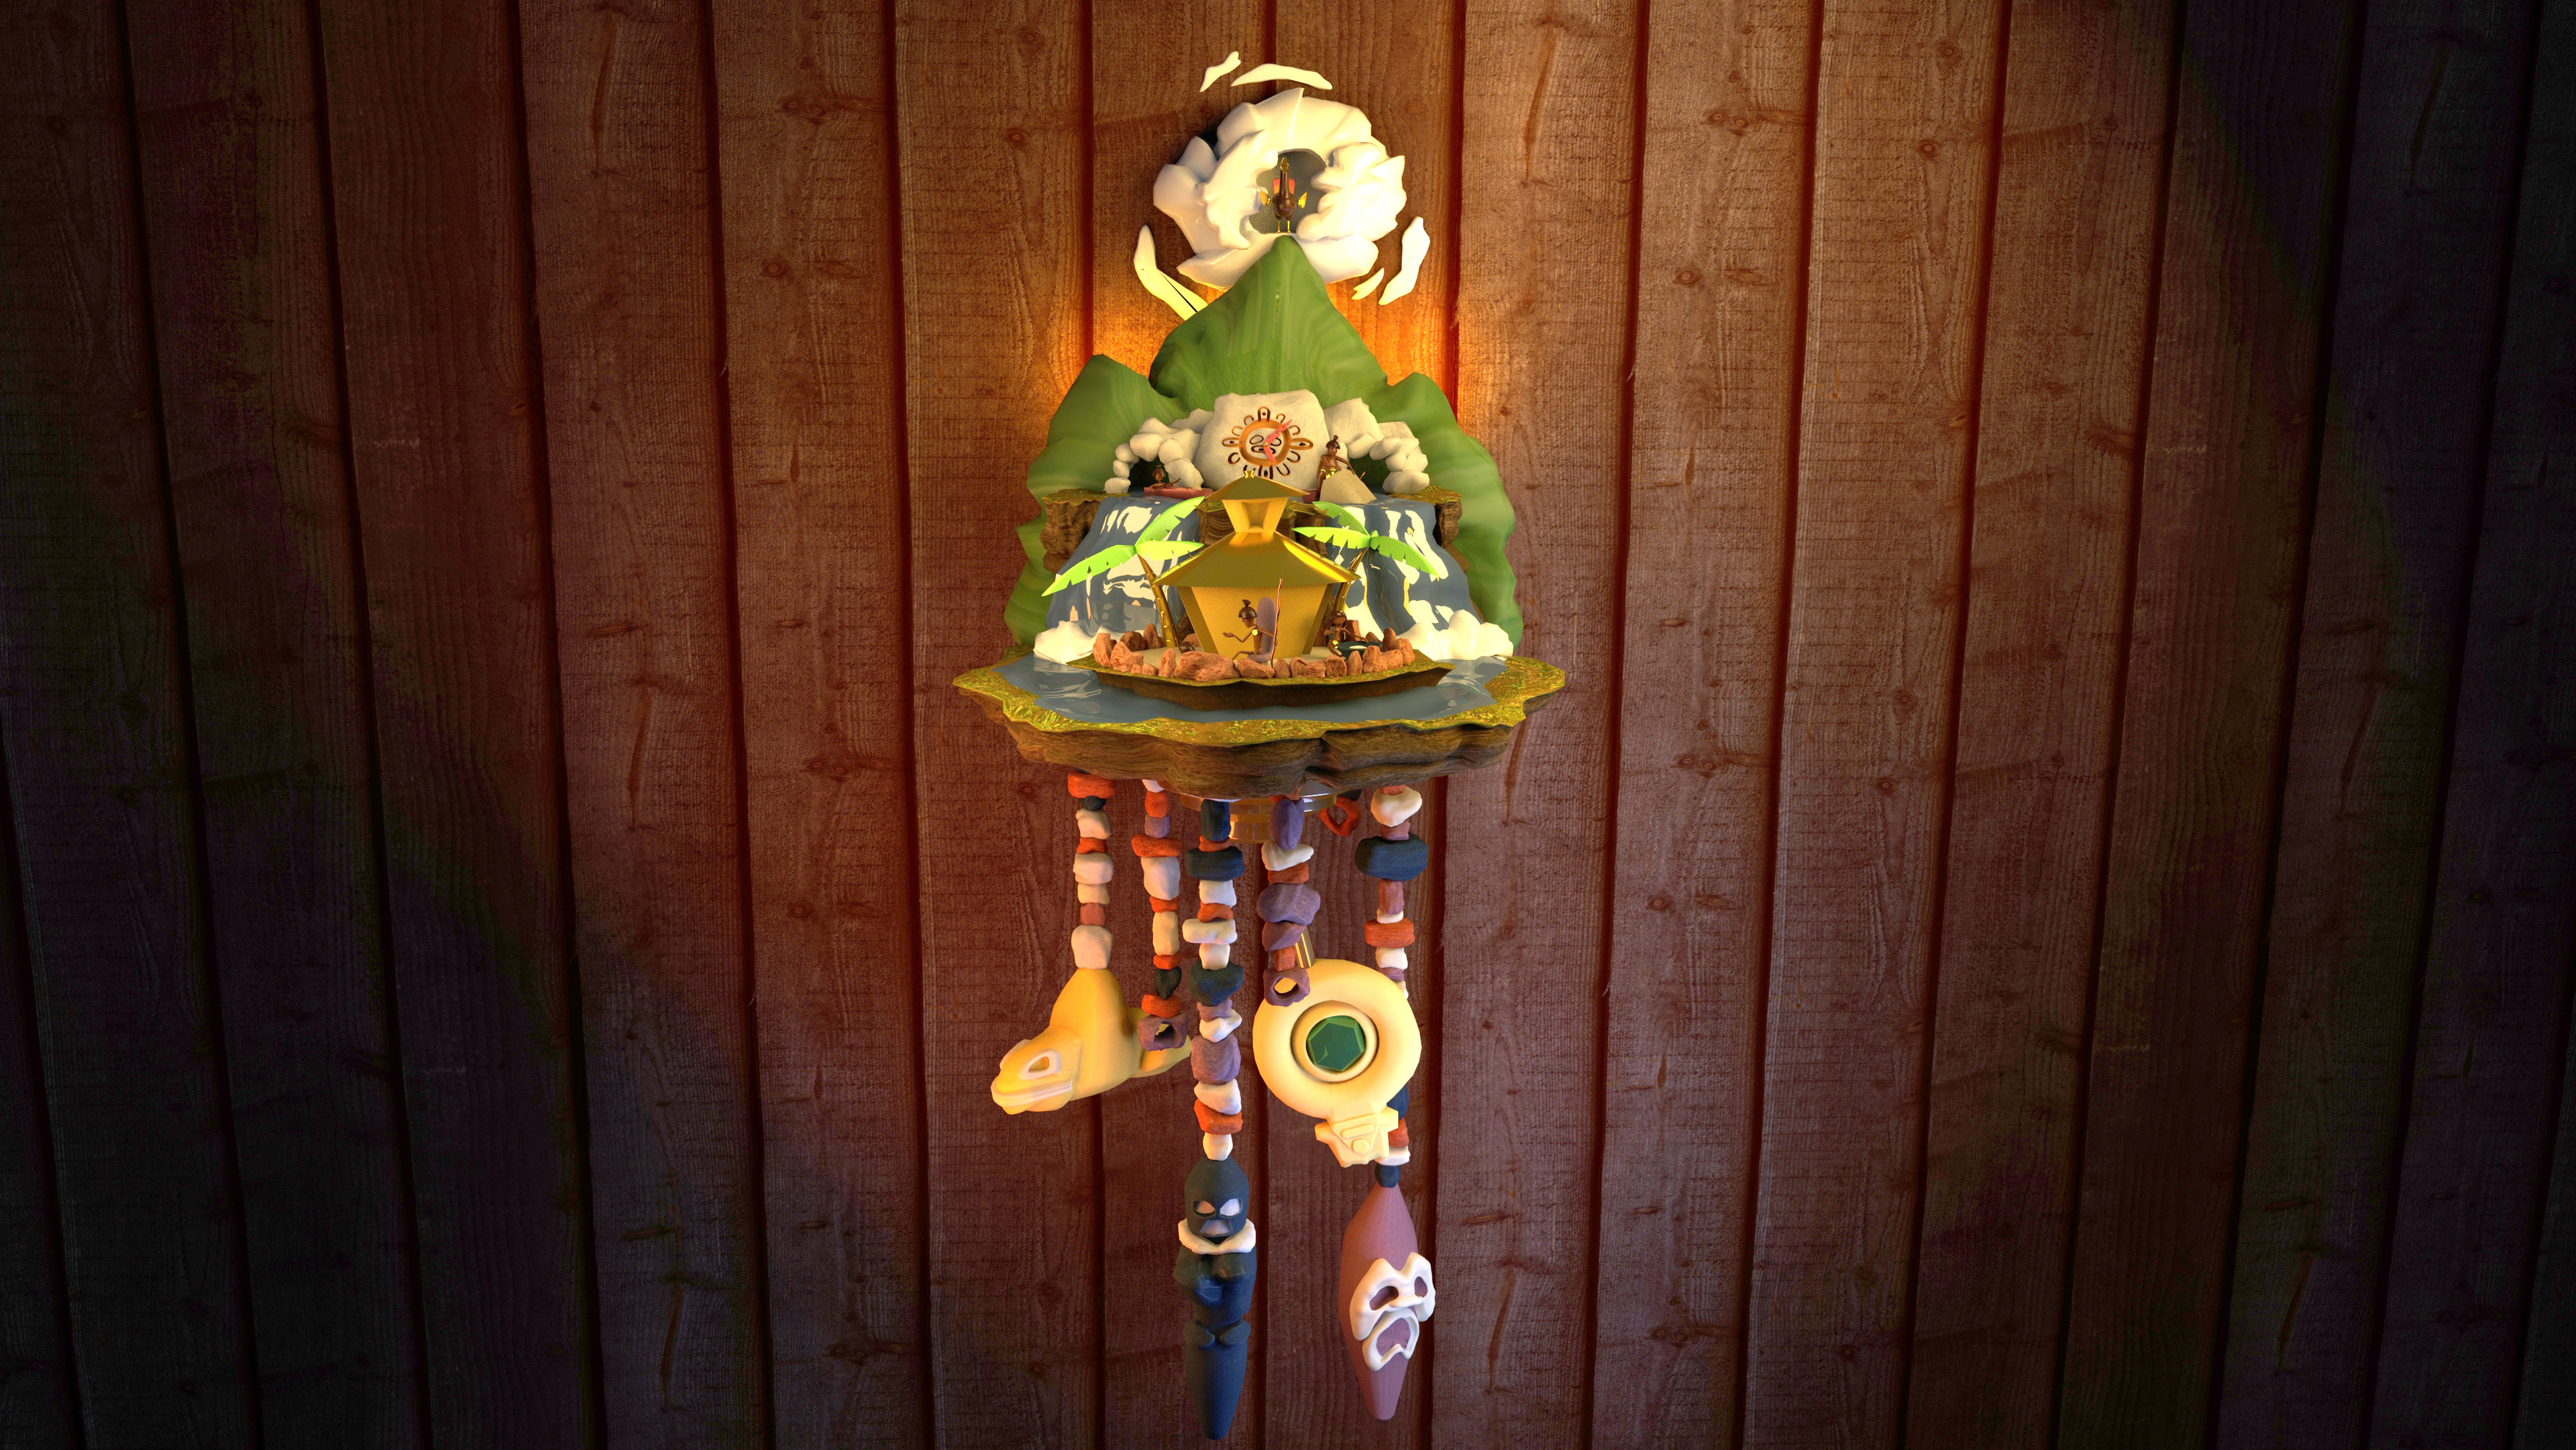 Full front view of Cuckoo Clock